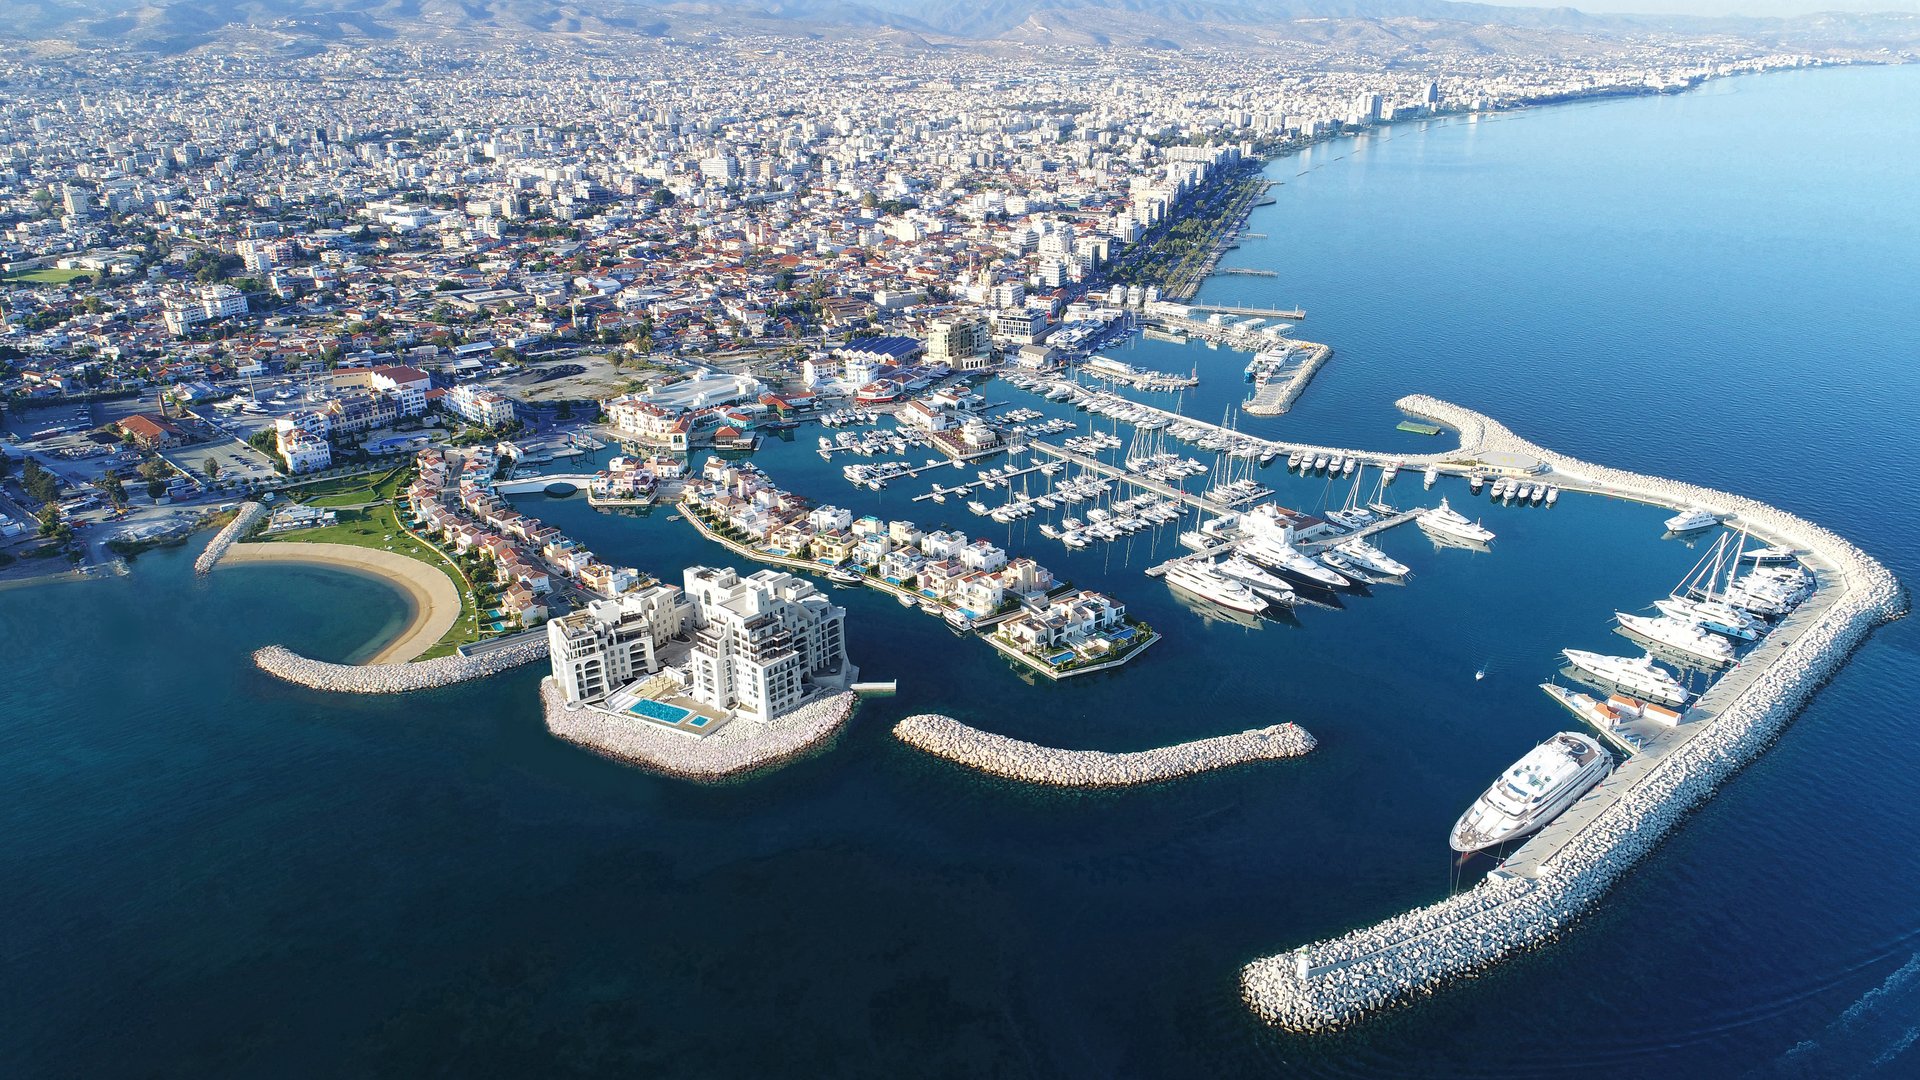 image ‘Buyer demand is high for Limassol Marina properties’ – Marina Manager